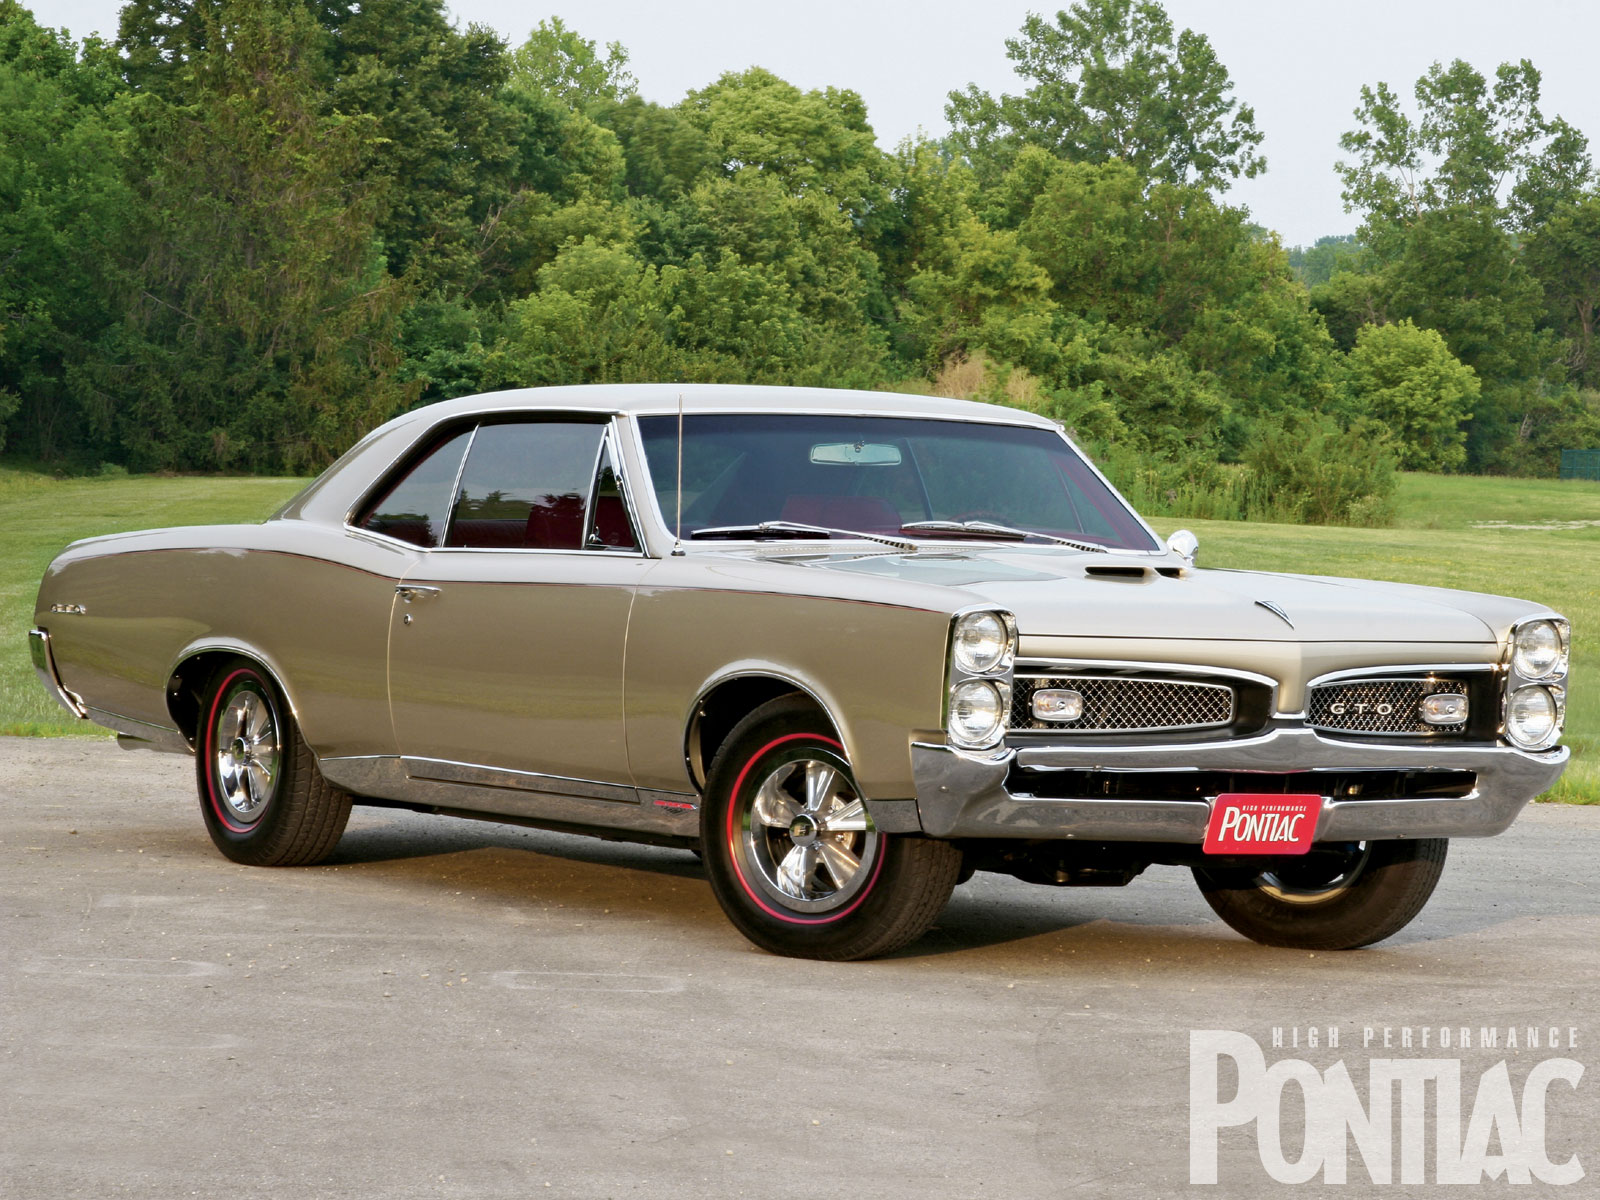 Amazing 1967 Pontiac Gto  Pictures & Backgrounds